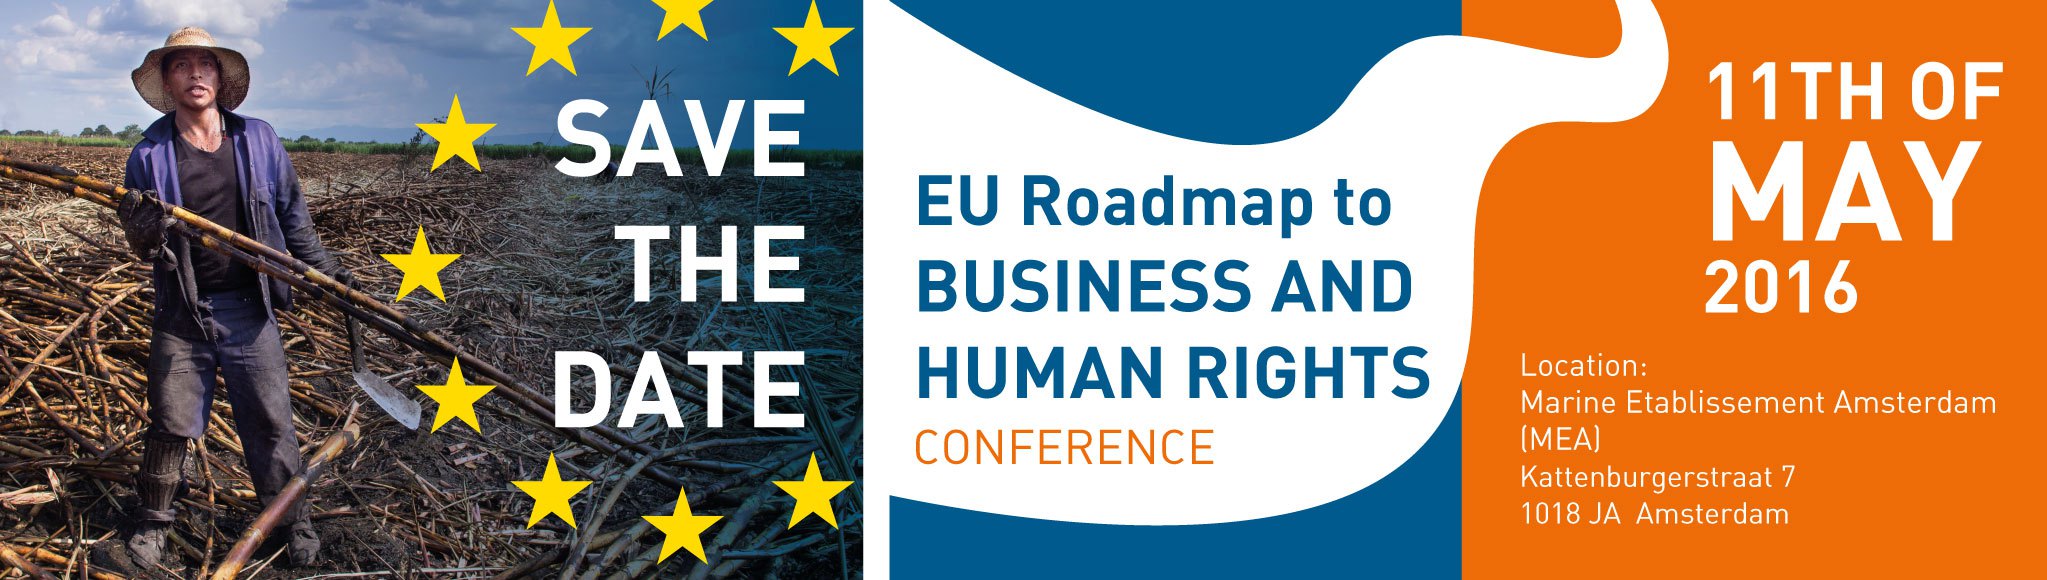 EU roadmap to business and human rights conference